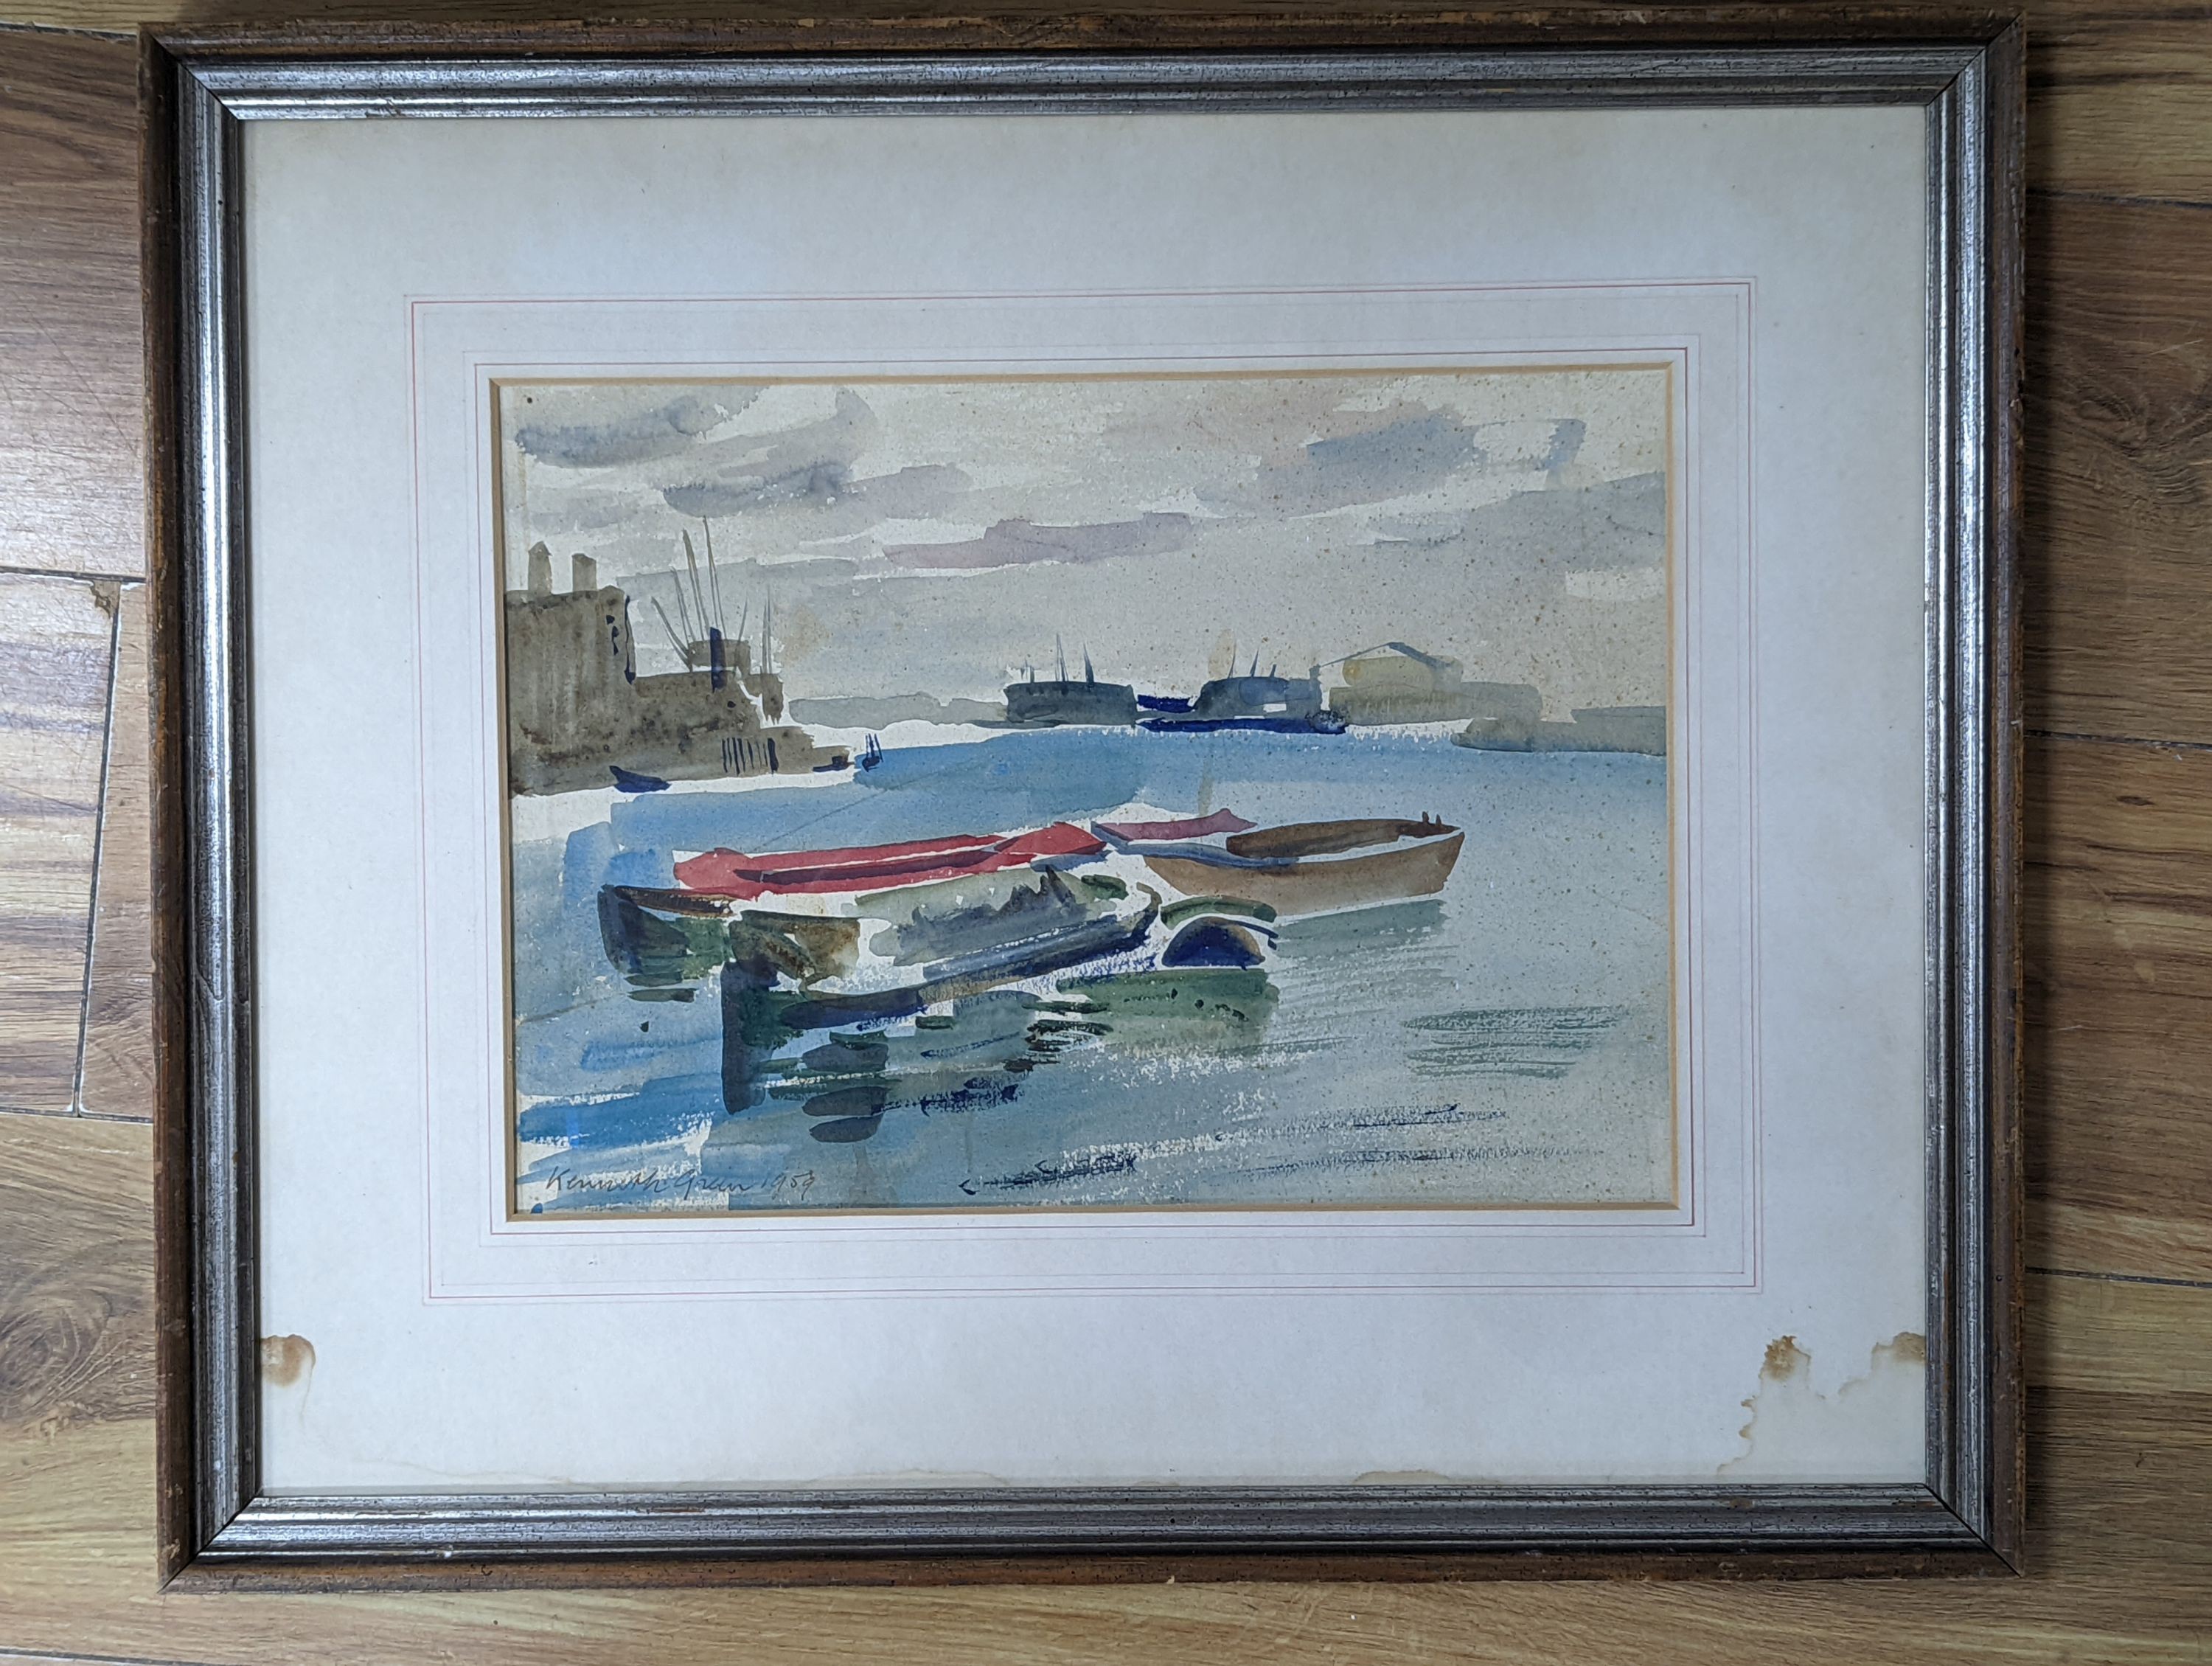 Kenneth Green (1916-1973), watercolour, View of along The Thames, signed and dated 1959, 24 x 34cm